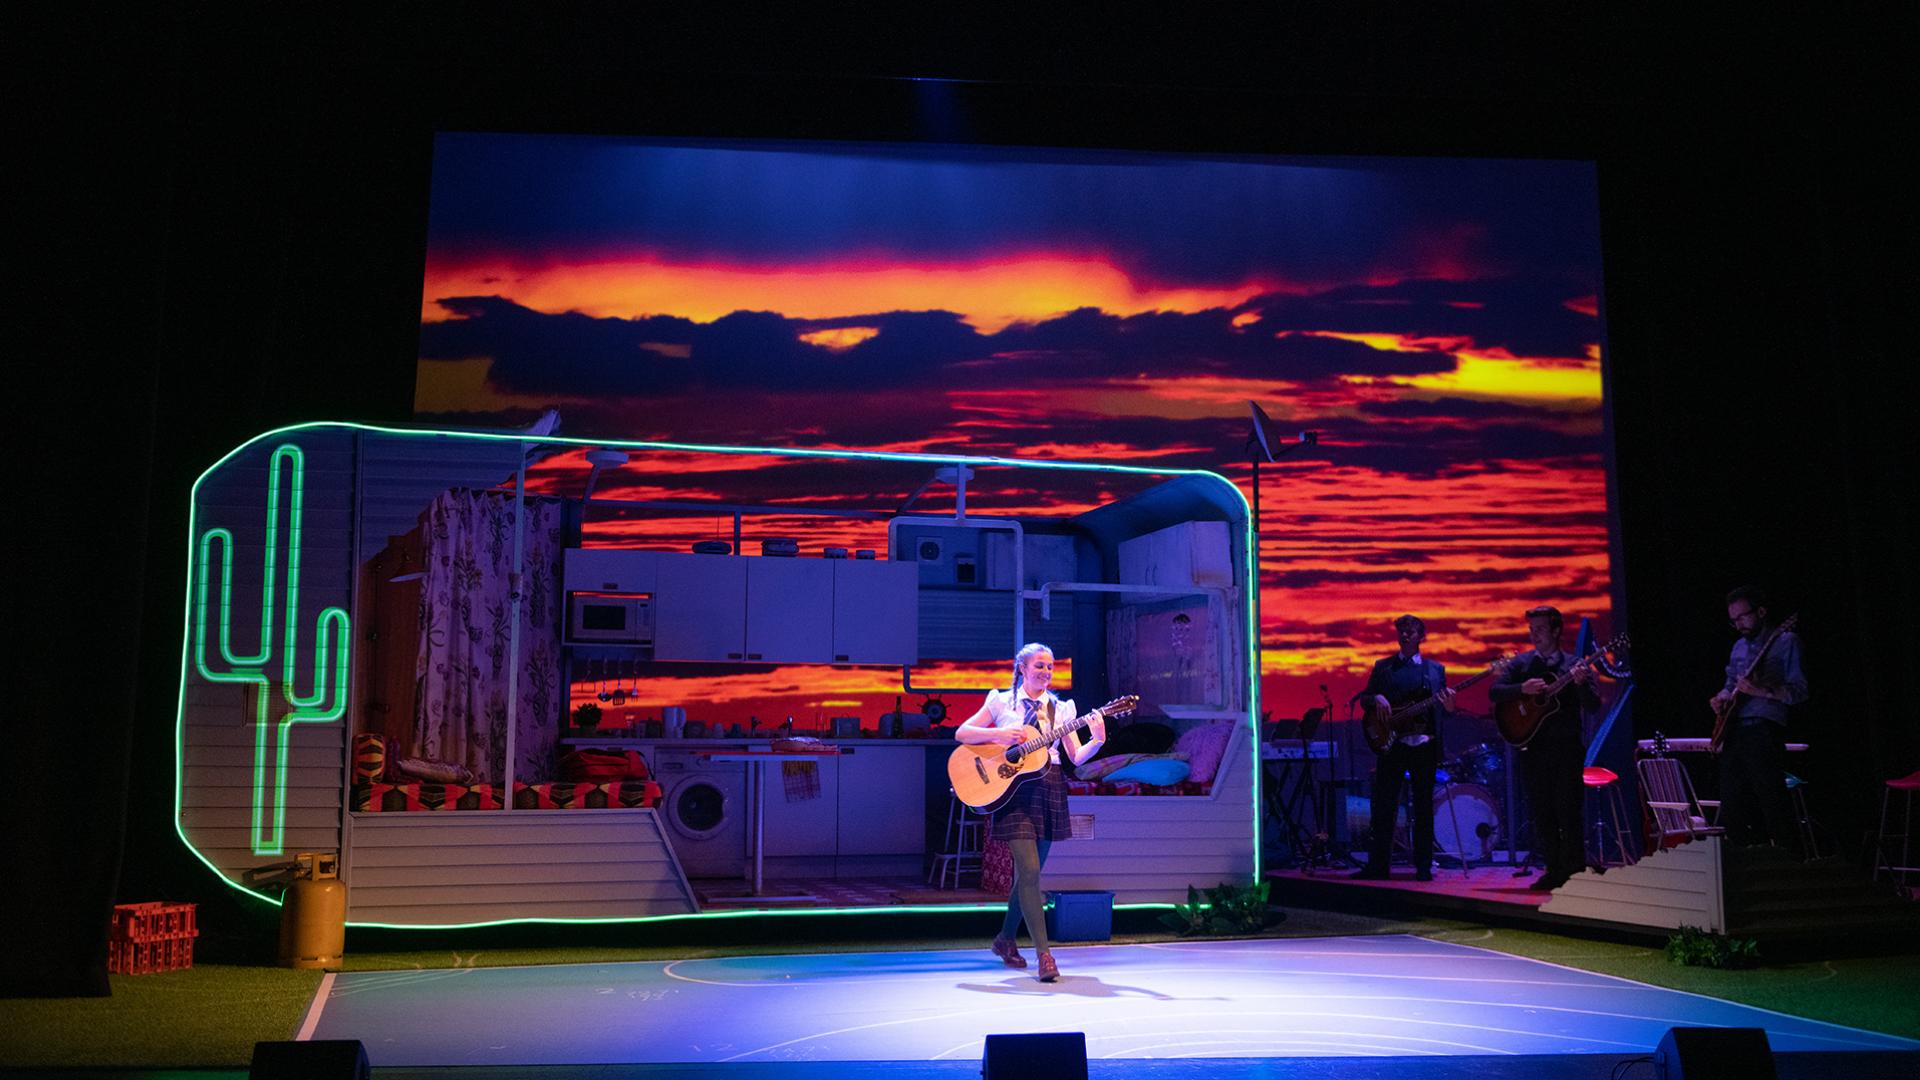 Set of an open sided caravan with a neon cactus, colourful sunset and a school girl playing the guitar